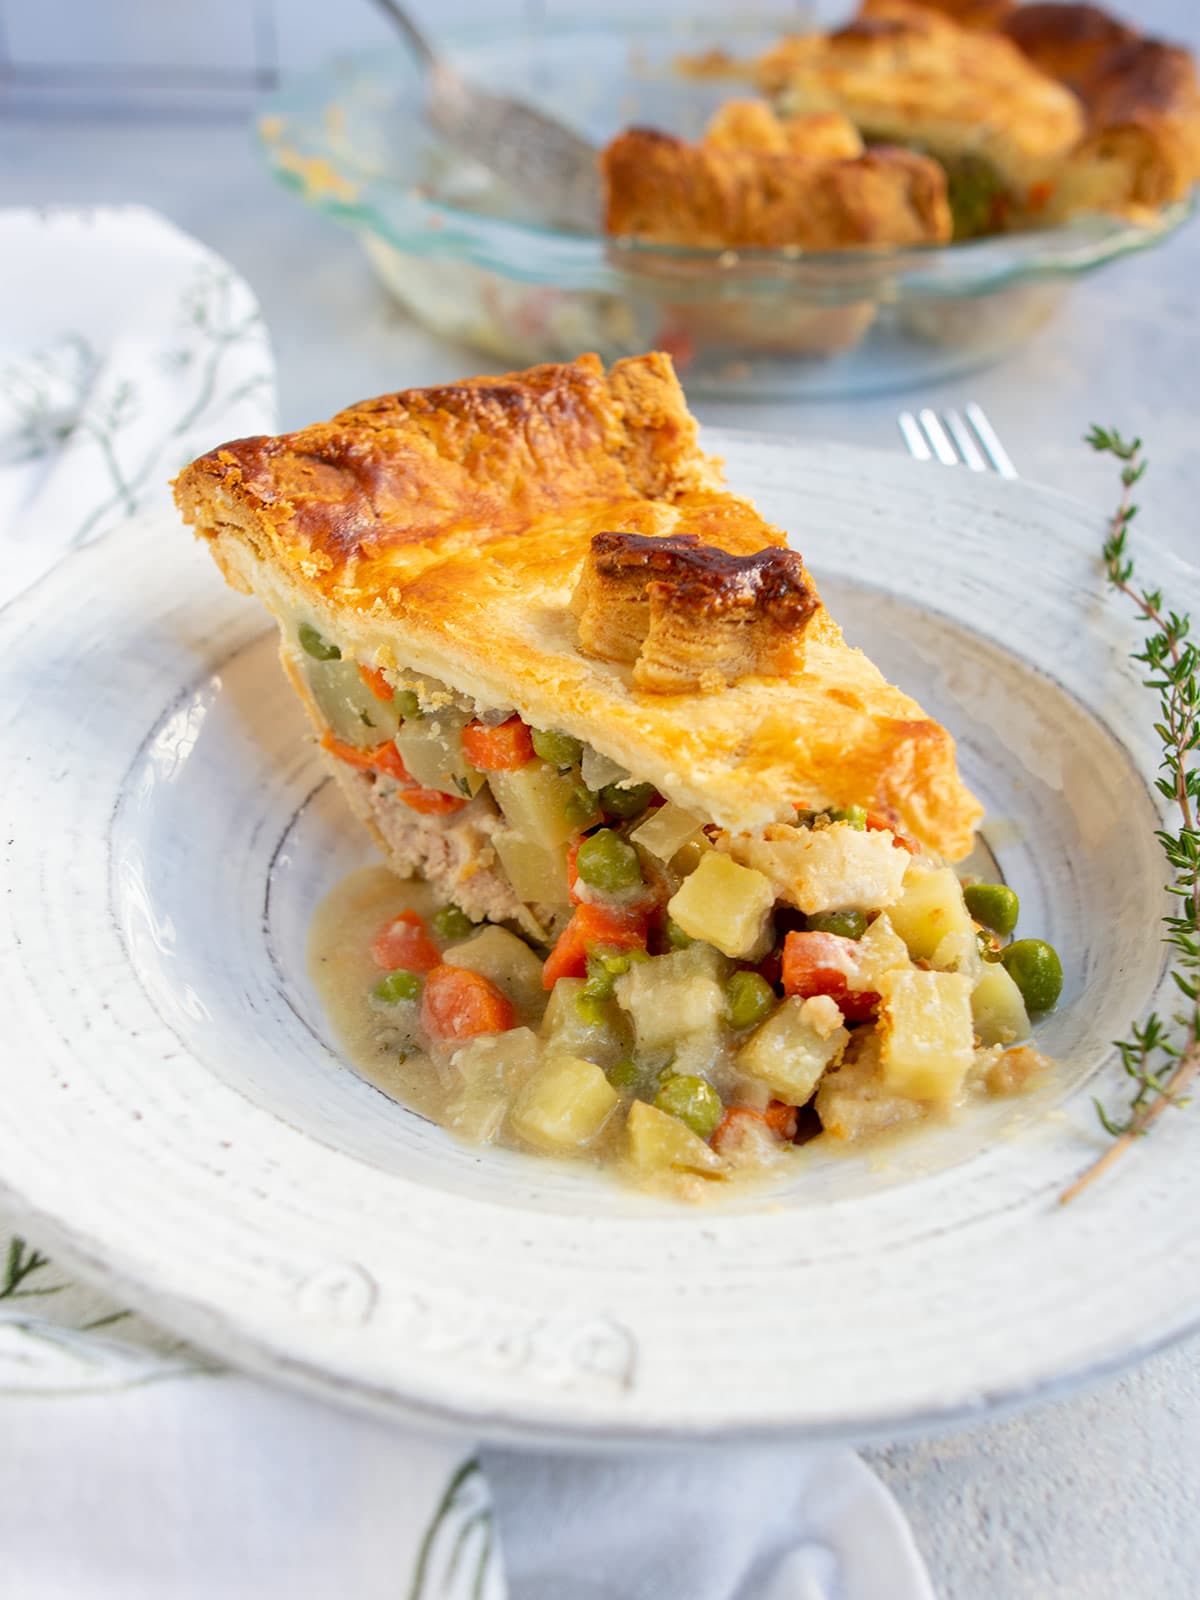 A slice of baked turkey pot pie with golden crust and colorful filling.